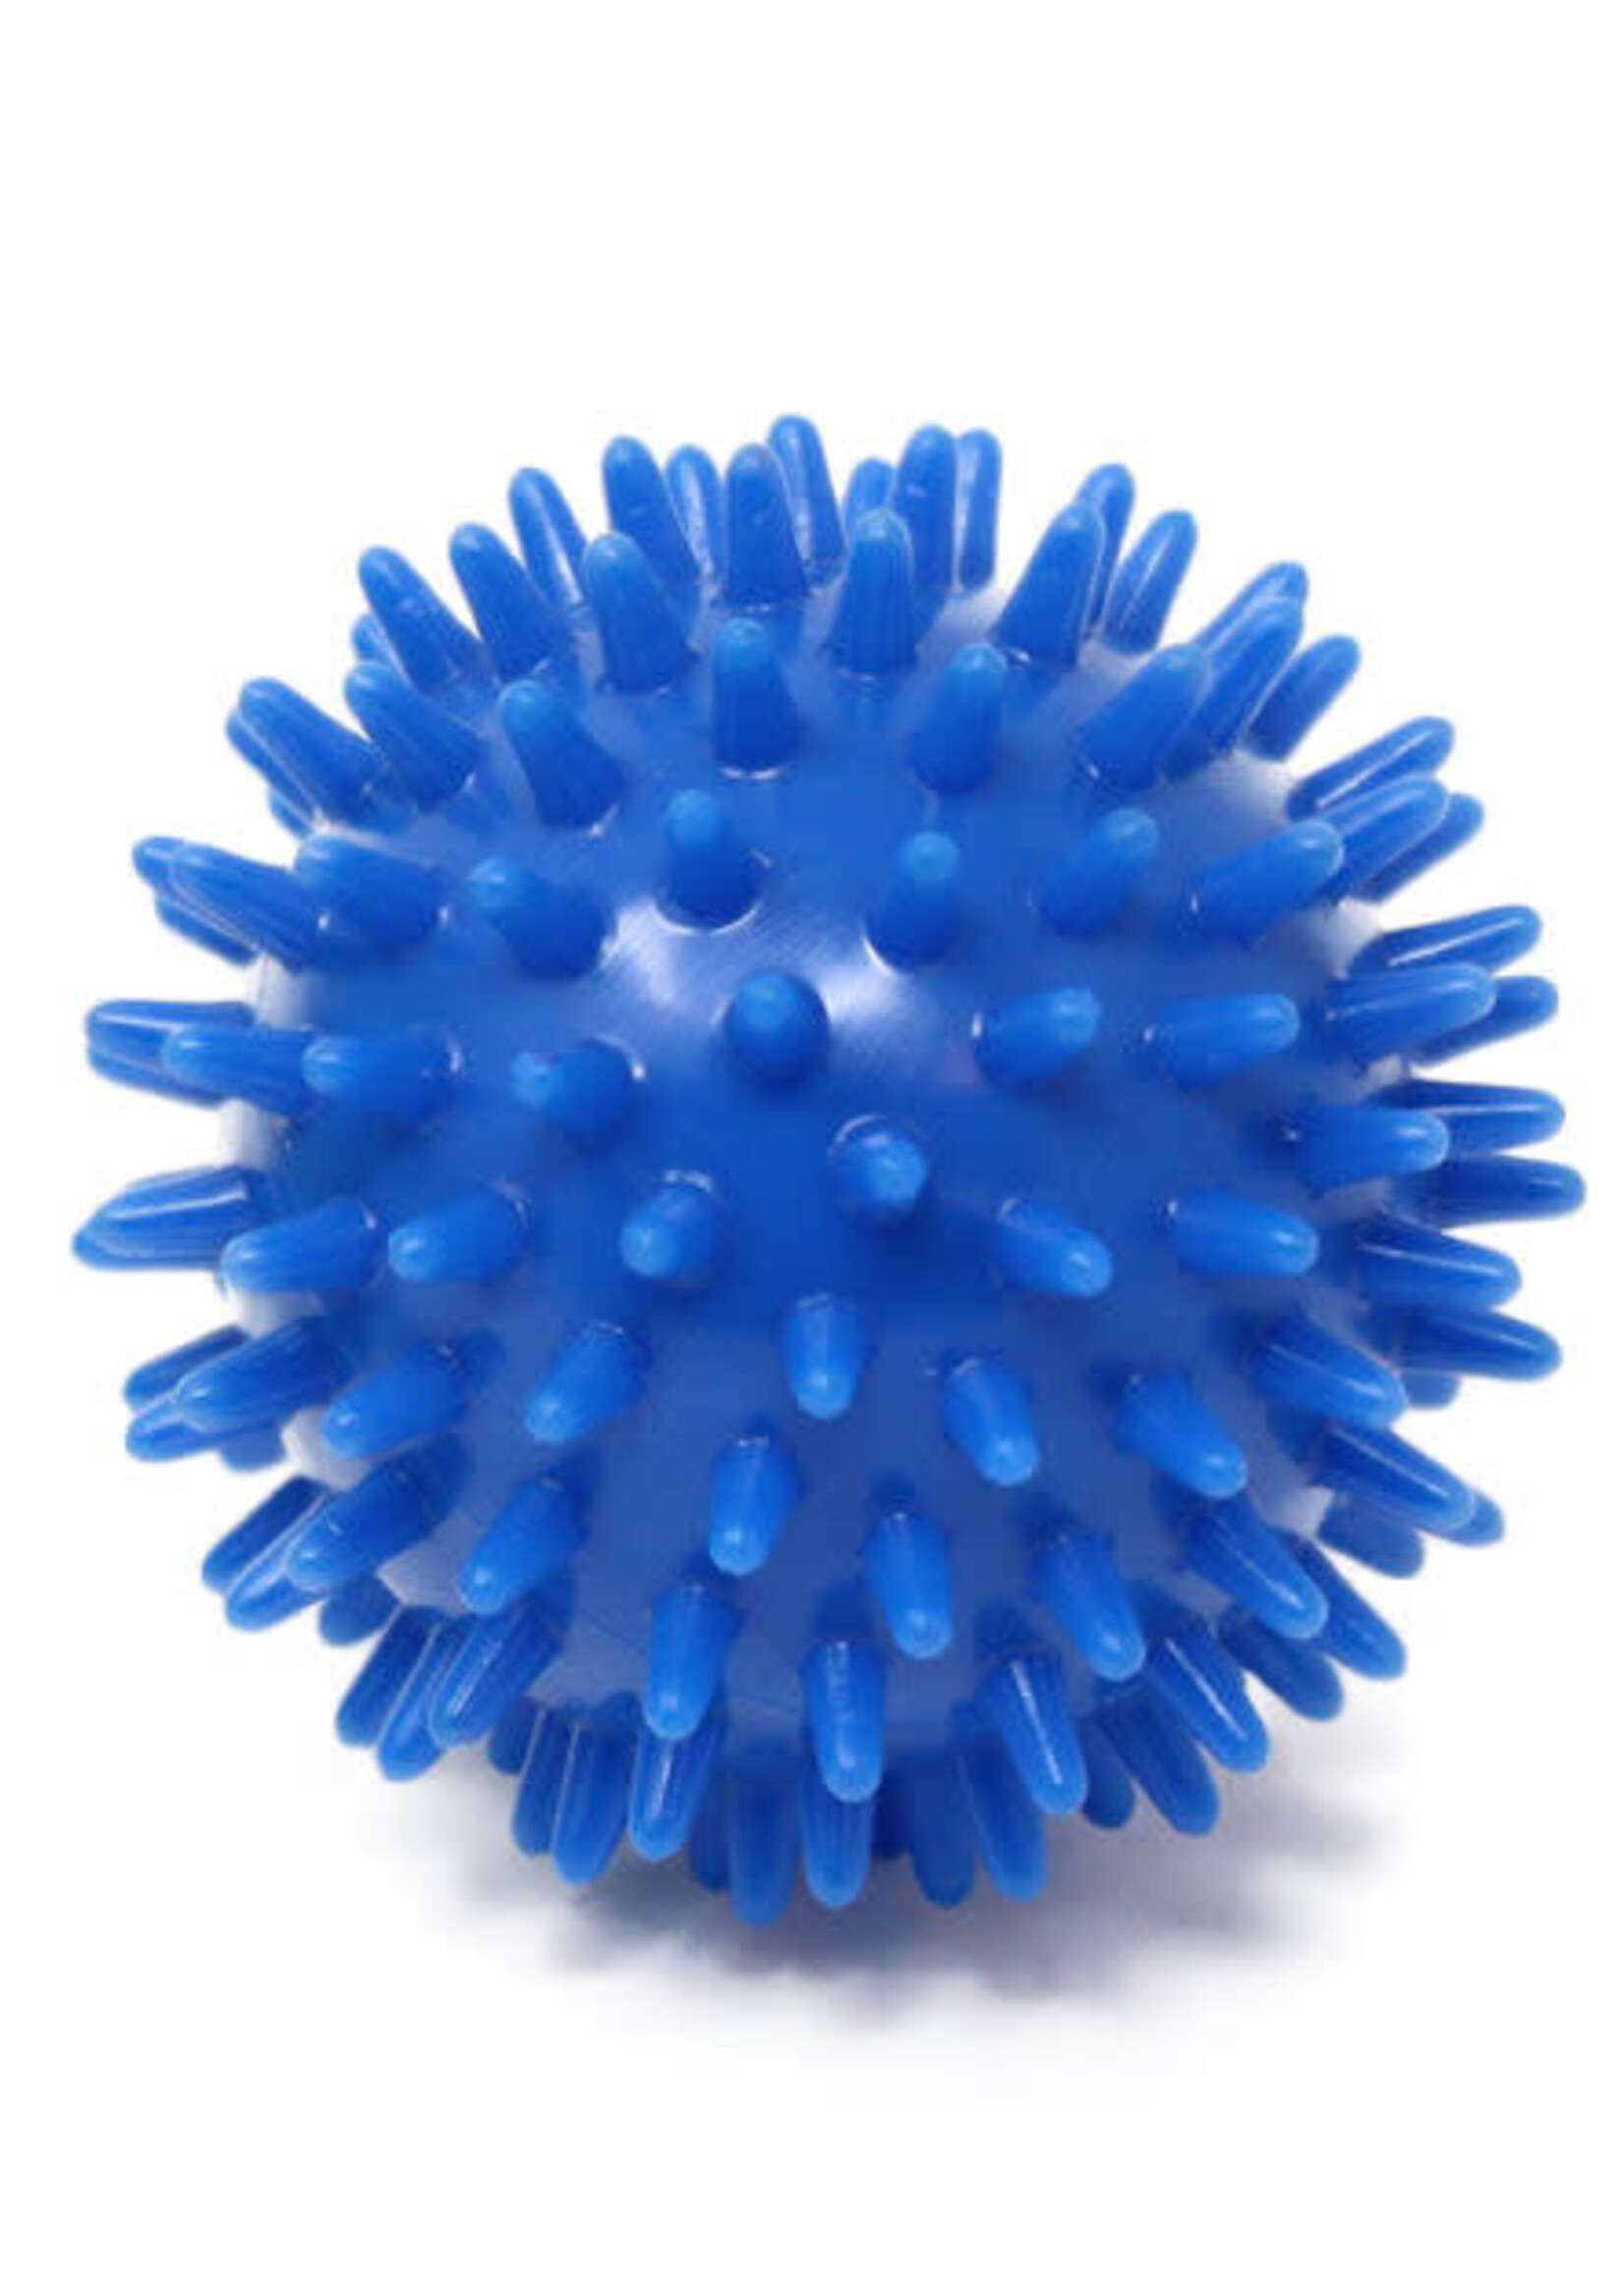 SUPERIOR STRETCH PRODUCTS Spiky Massage Ball - BLUE